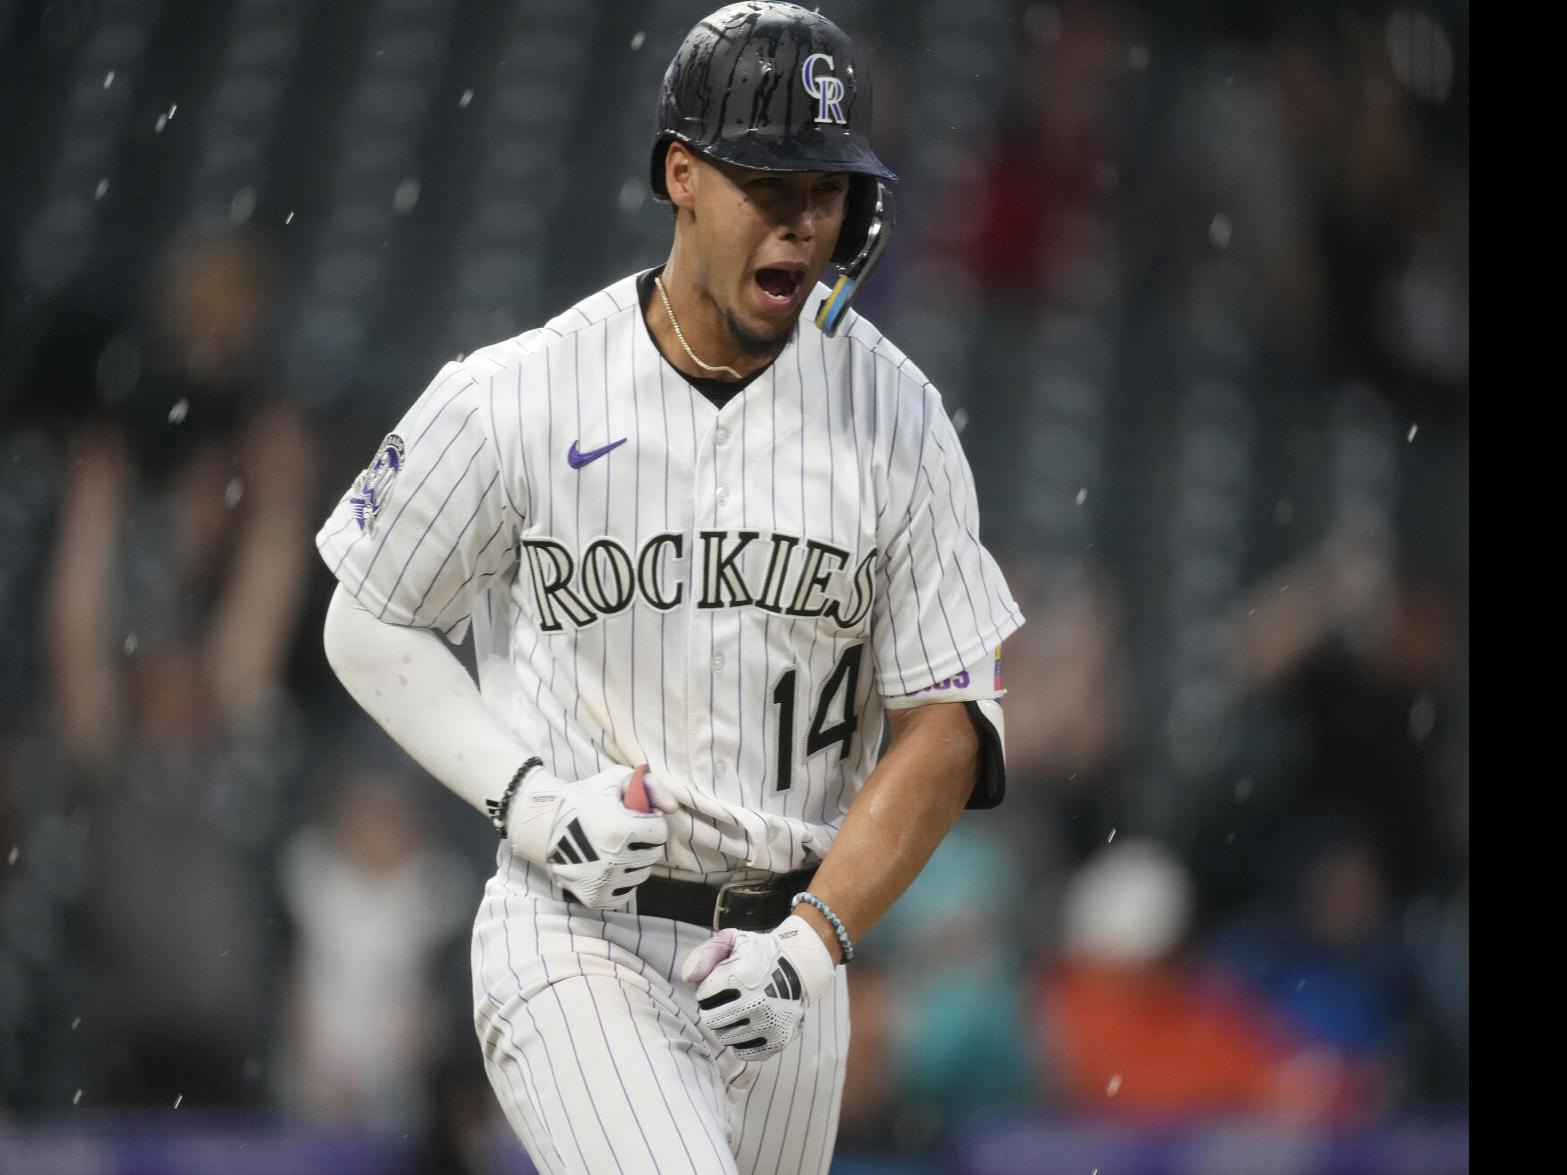 Ezequiel Tovar collects three hits in Rockies' loss to Cubs